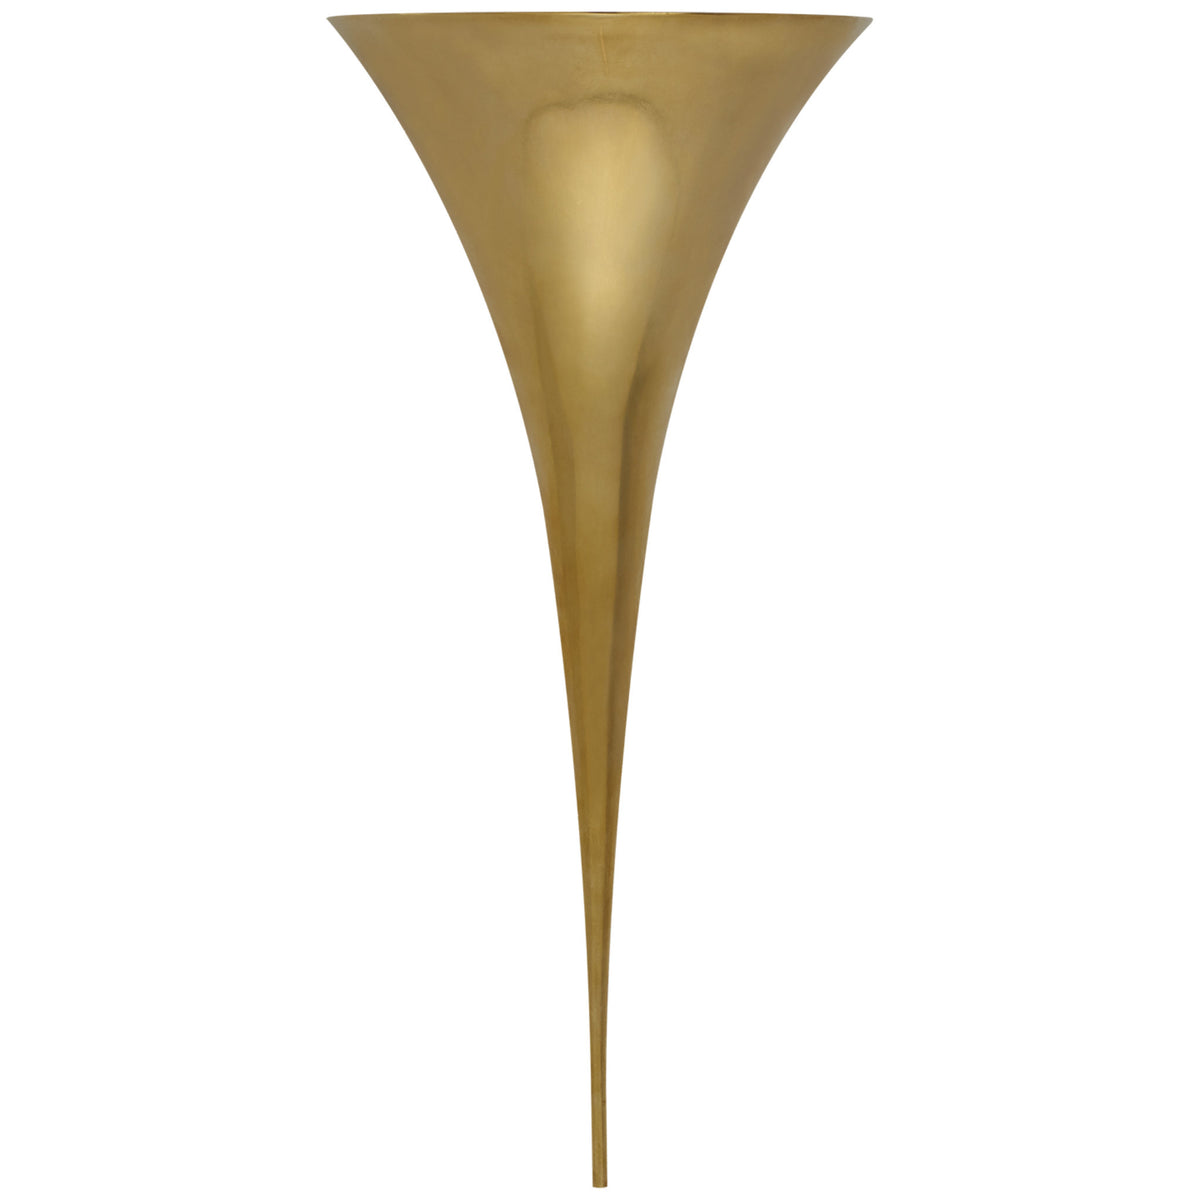 AERIN Clemente Double Sconce in Hand-Rubbed Antique Brass